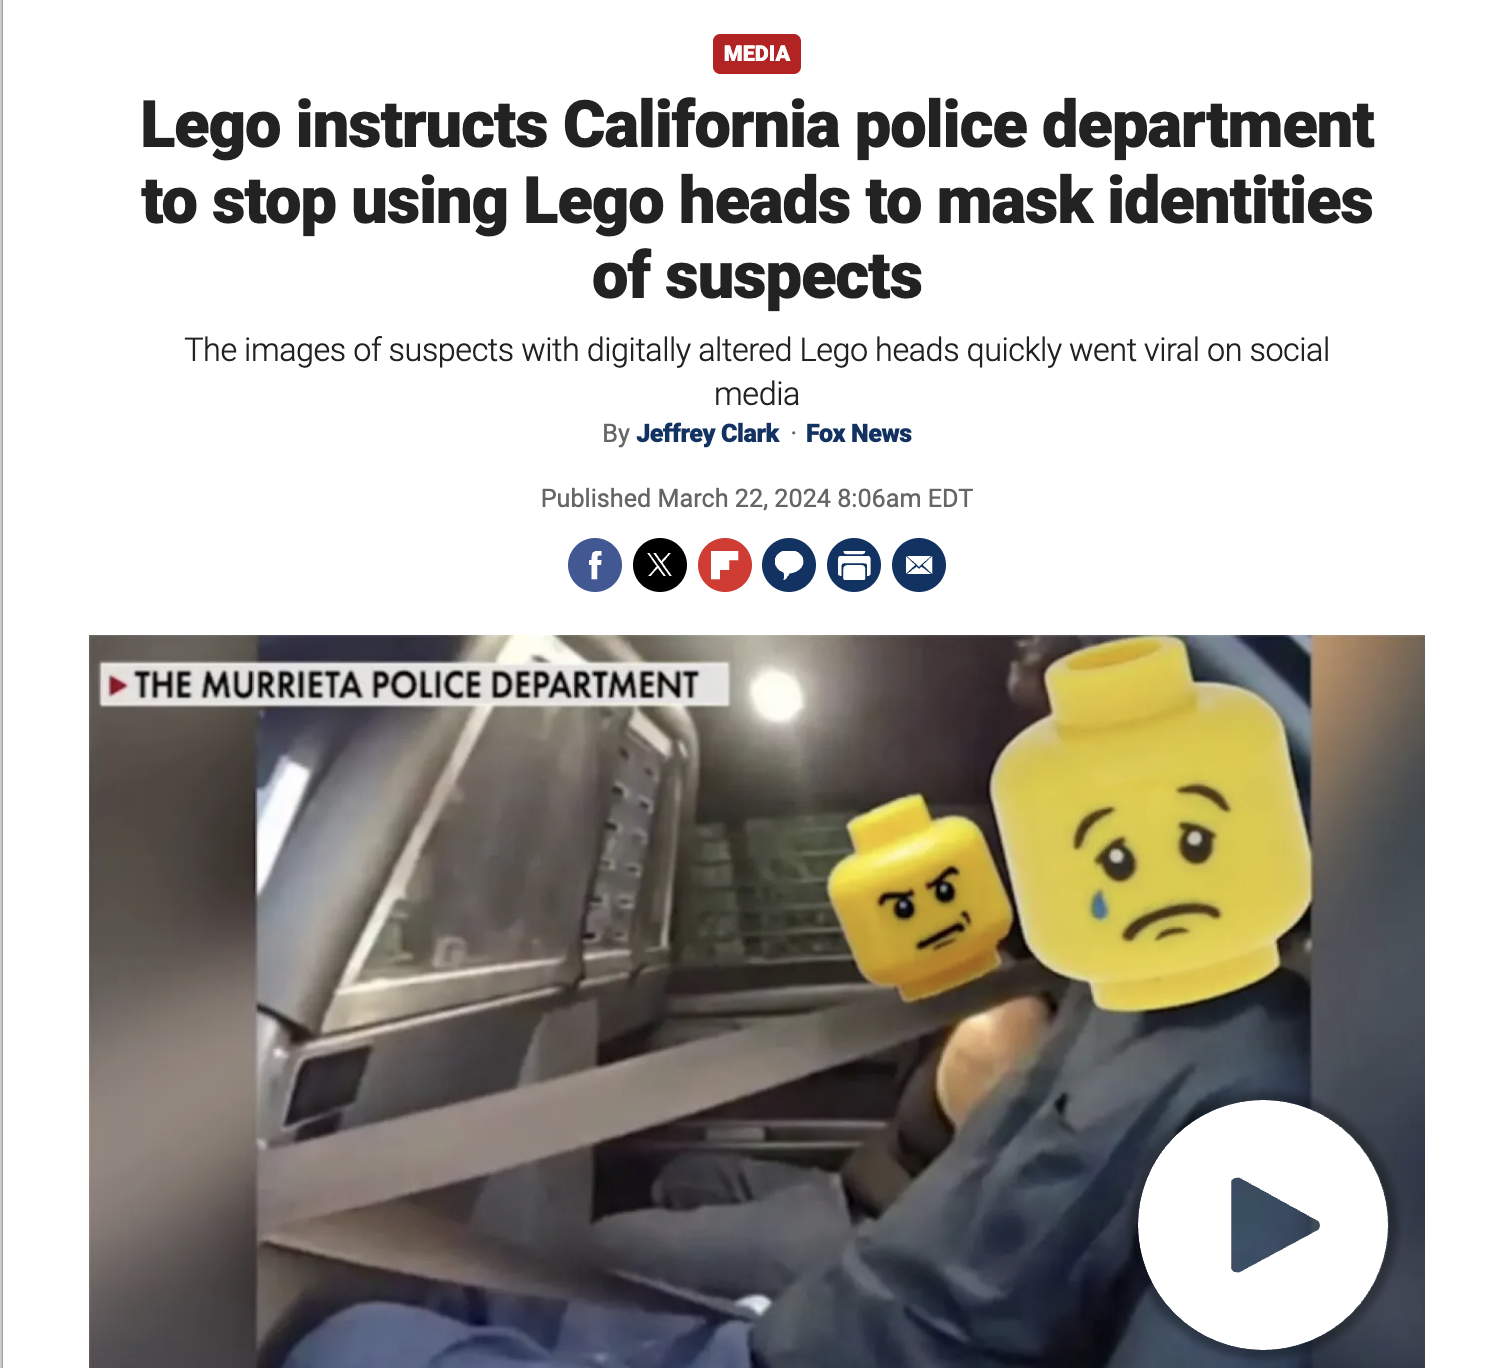 material - Media Lego instructs California police department to stop using Lego heads to mask identities of suspects The images of suspects with digitally altered Lego heads quickly went viral on social media By Jeffrey Clark Fox News Published am Edt The